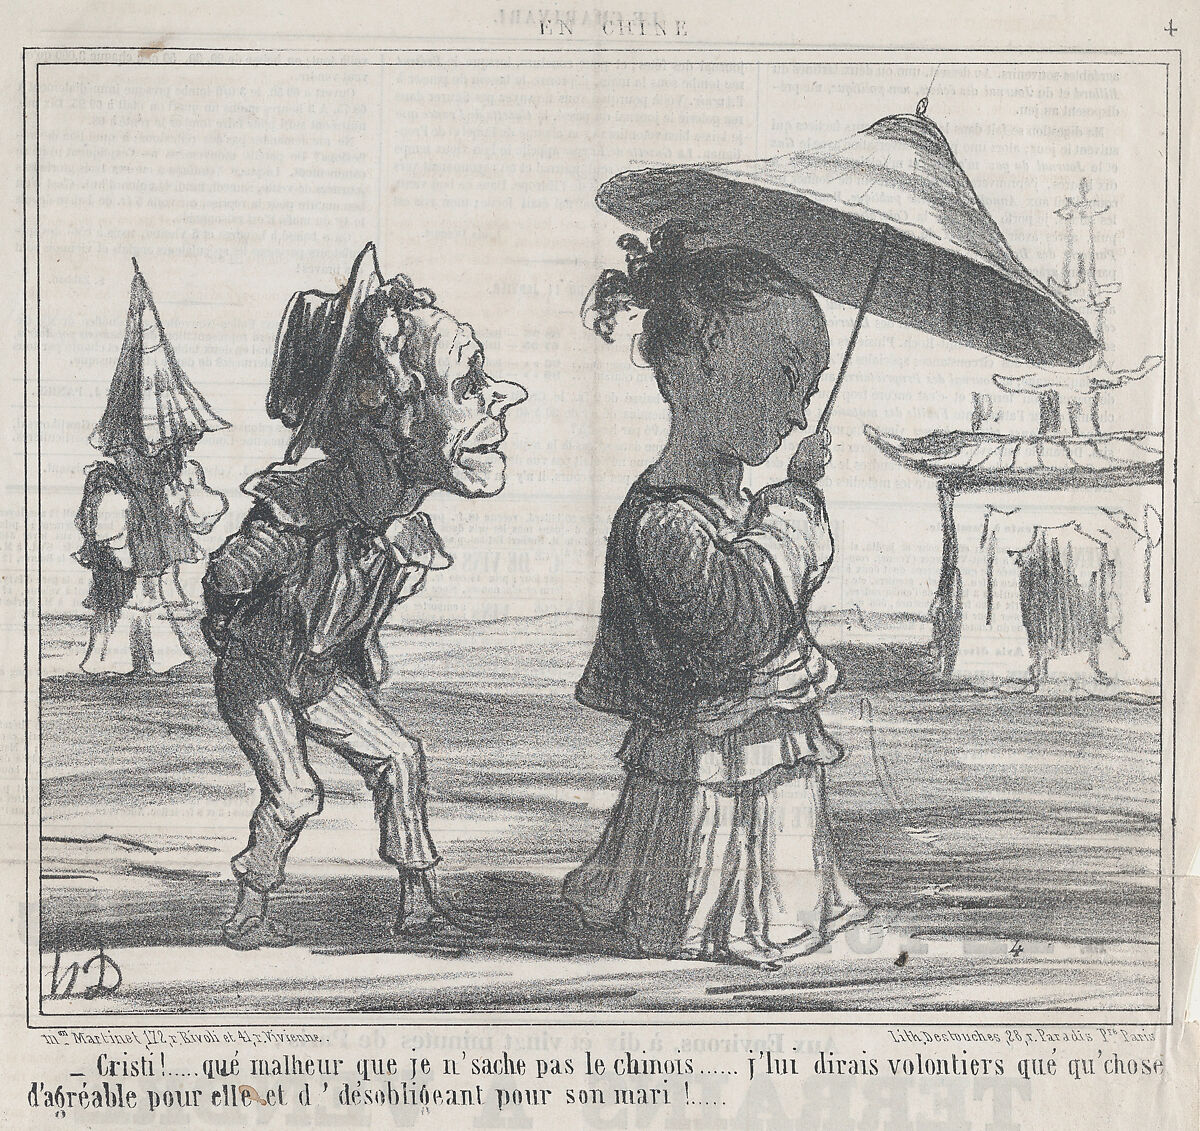 Cristi! ..... qué malheur...., from En Chine, published in Le Charivari, January 12, 1859, Honoré Daumier (French, Marseilles 1808–1879 Valmondois), Lithograph on newsprint; second state of two (Delteil) 